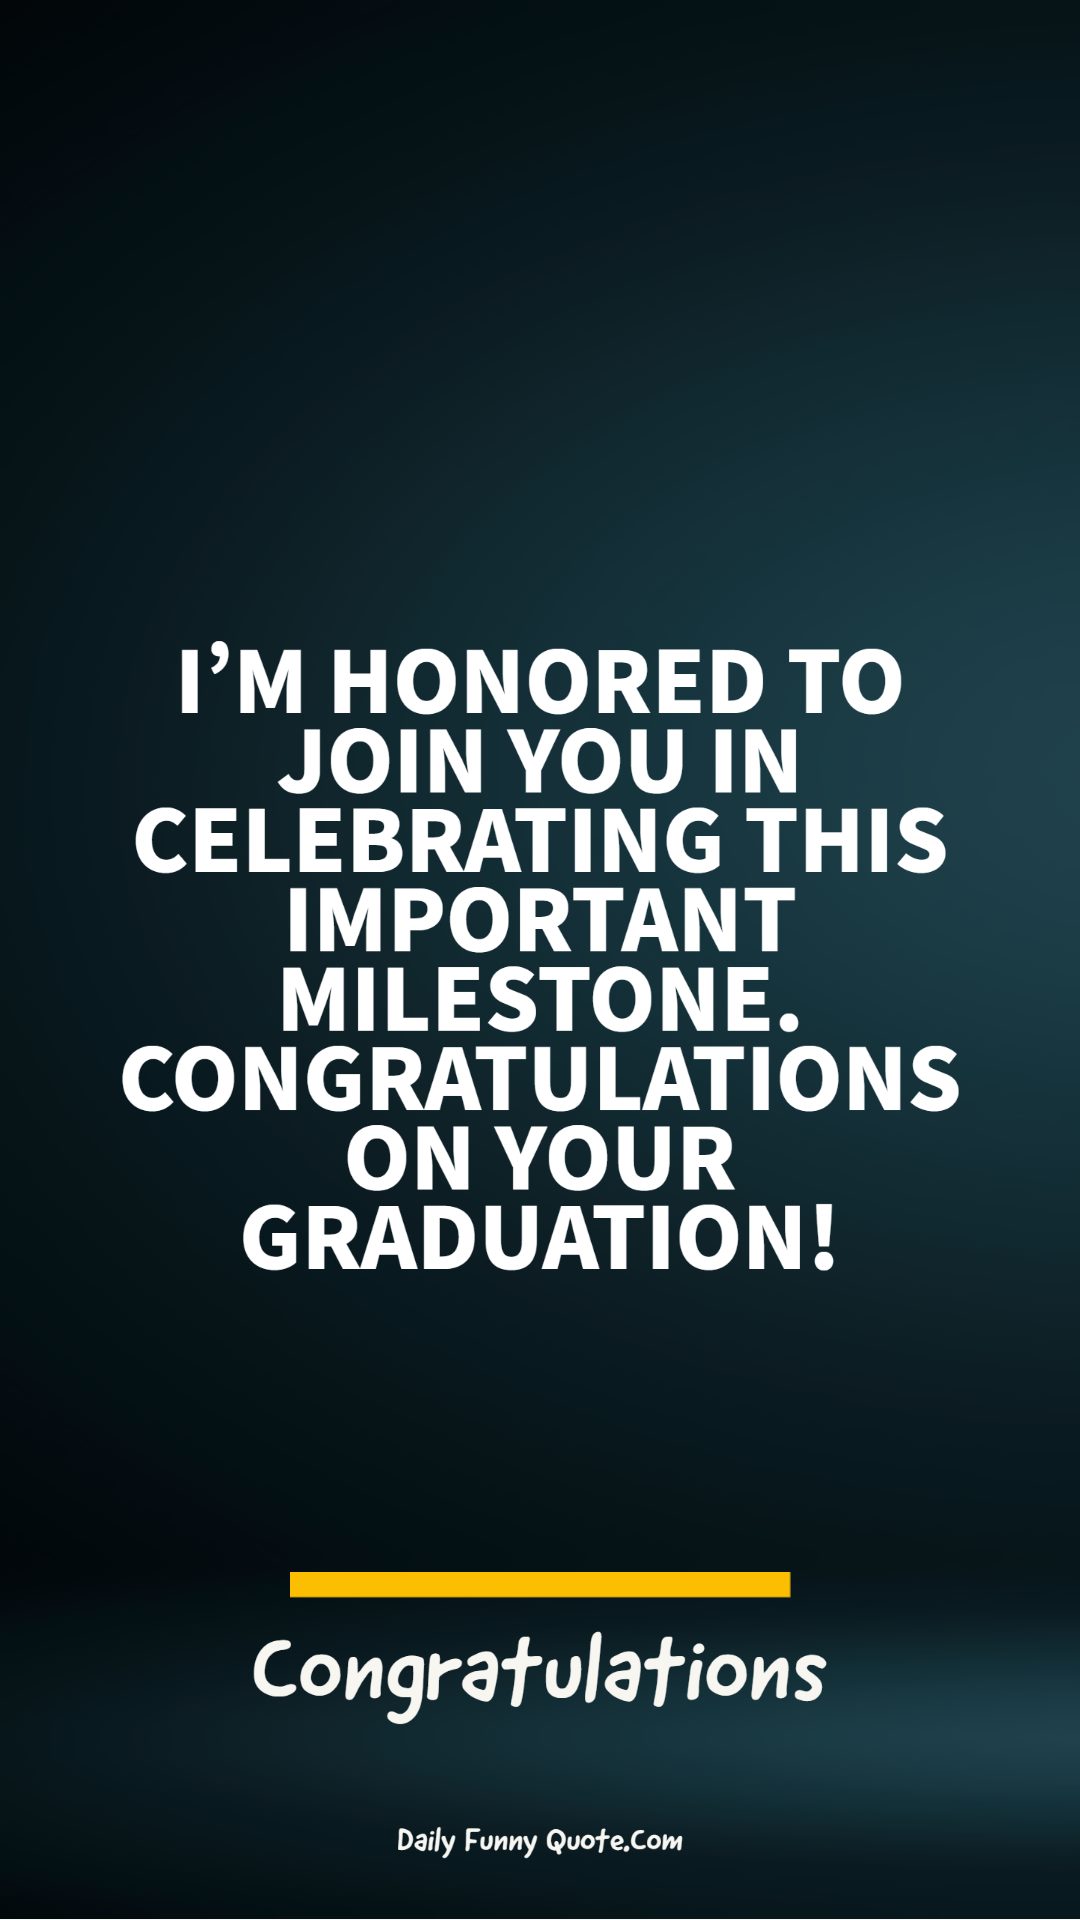 best graduation wishes to congratulate them on all their success